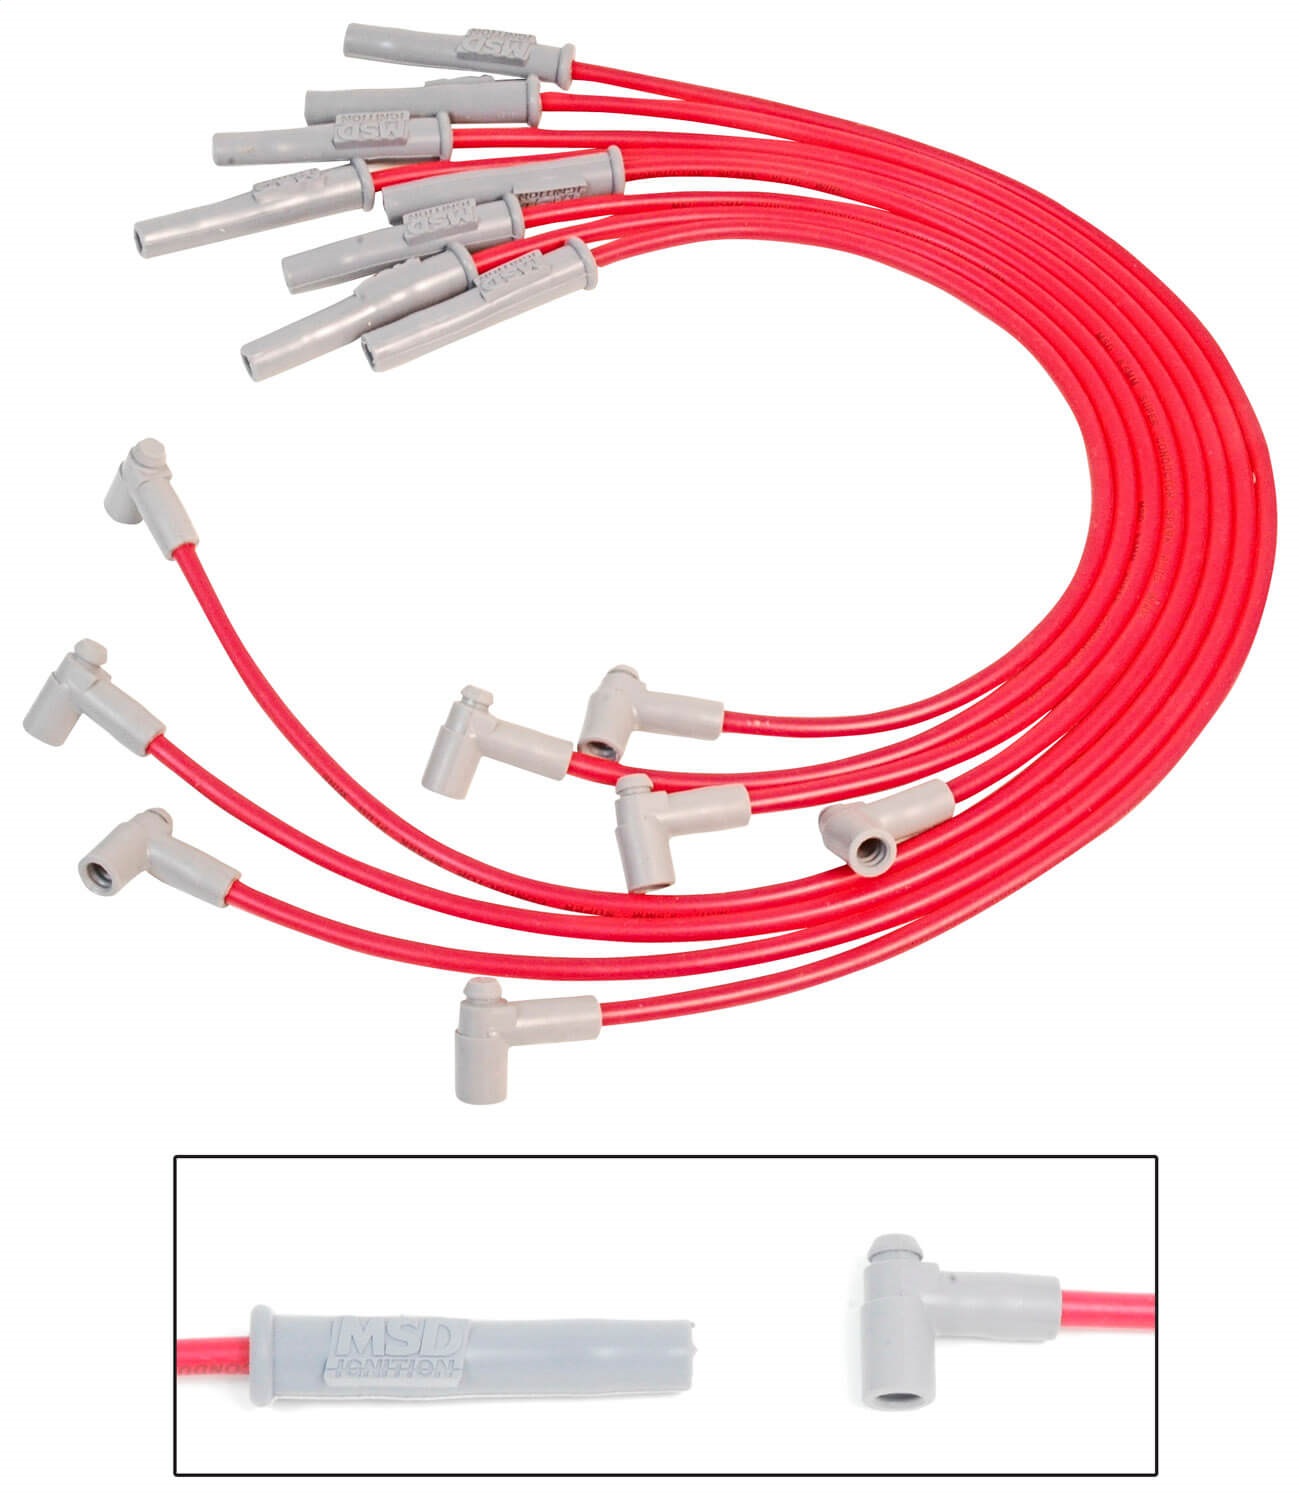 8.5MM Spark Plug Wire Set - Red - 35379